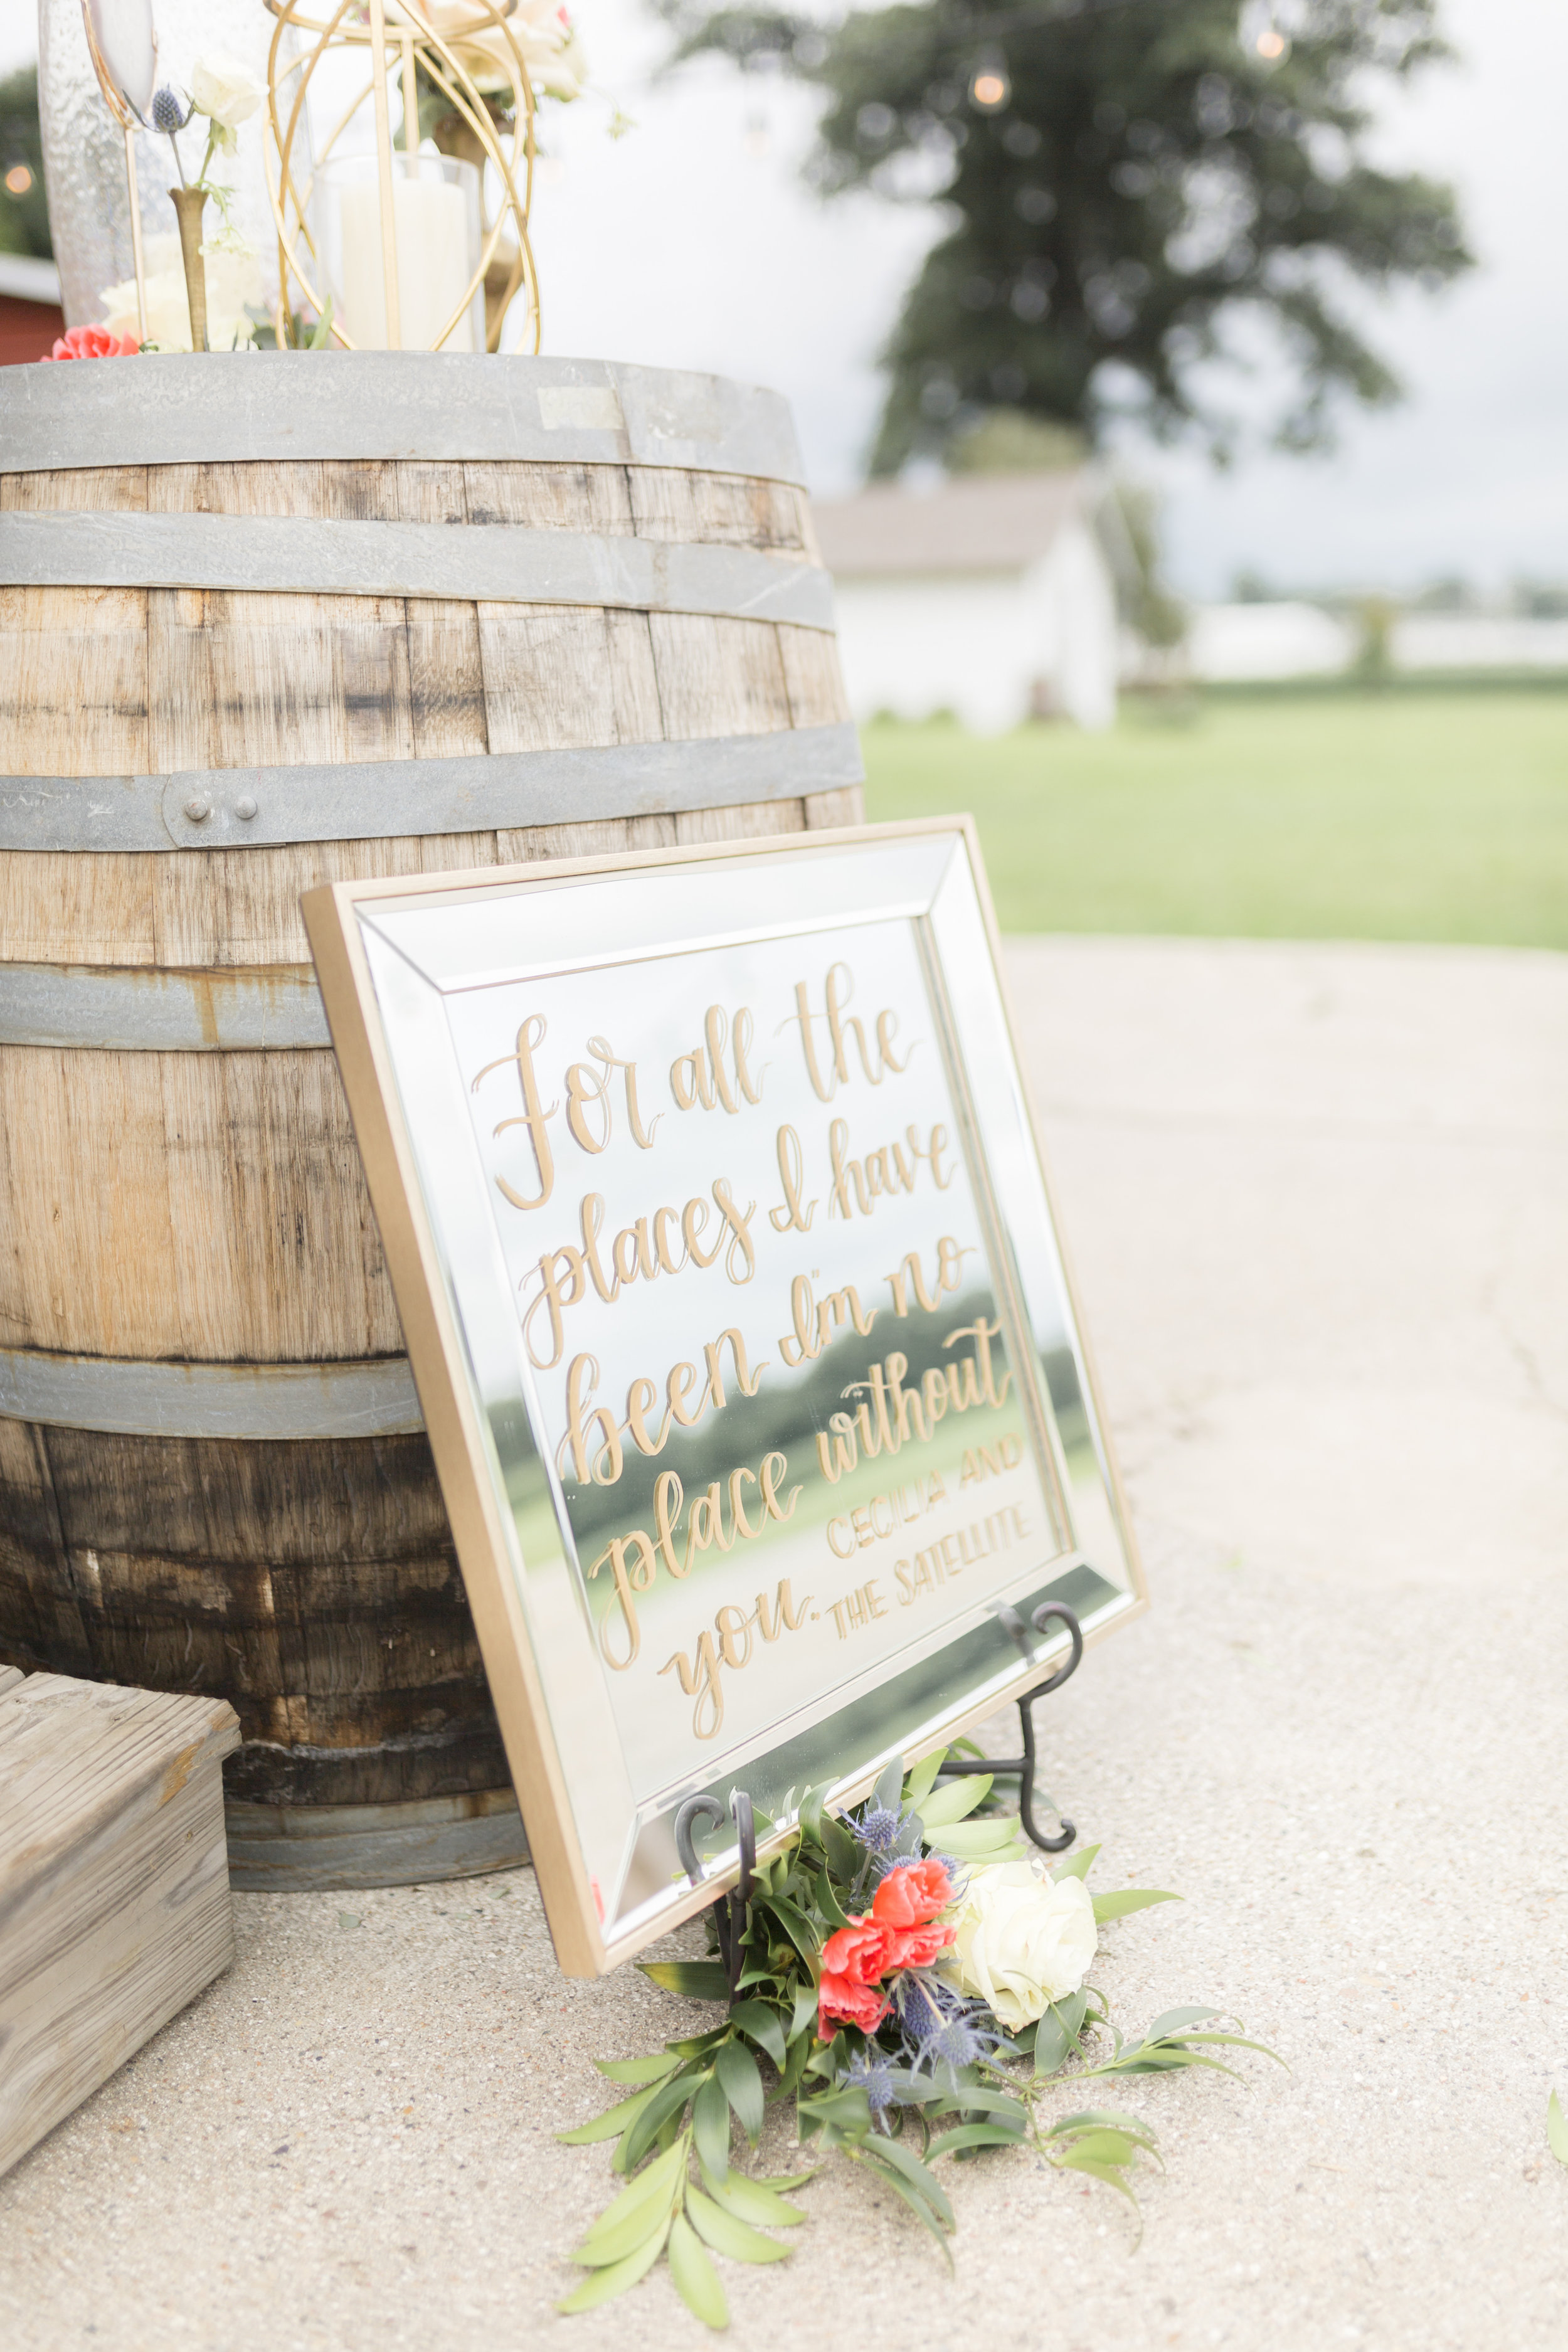 Summer rustic elegant Chicago wedding styled shoot captured by Sarah DeMaranville Photography. See more summer wedding ideas at CHItheeWED.com!